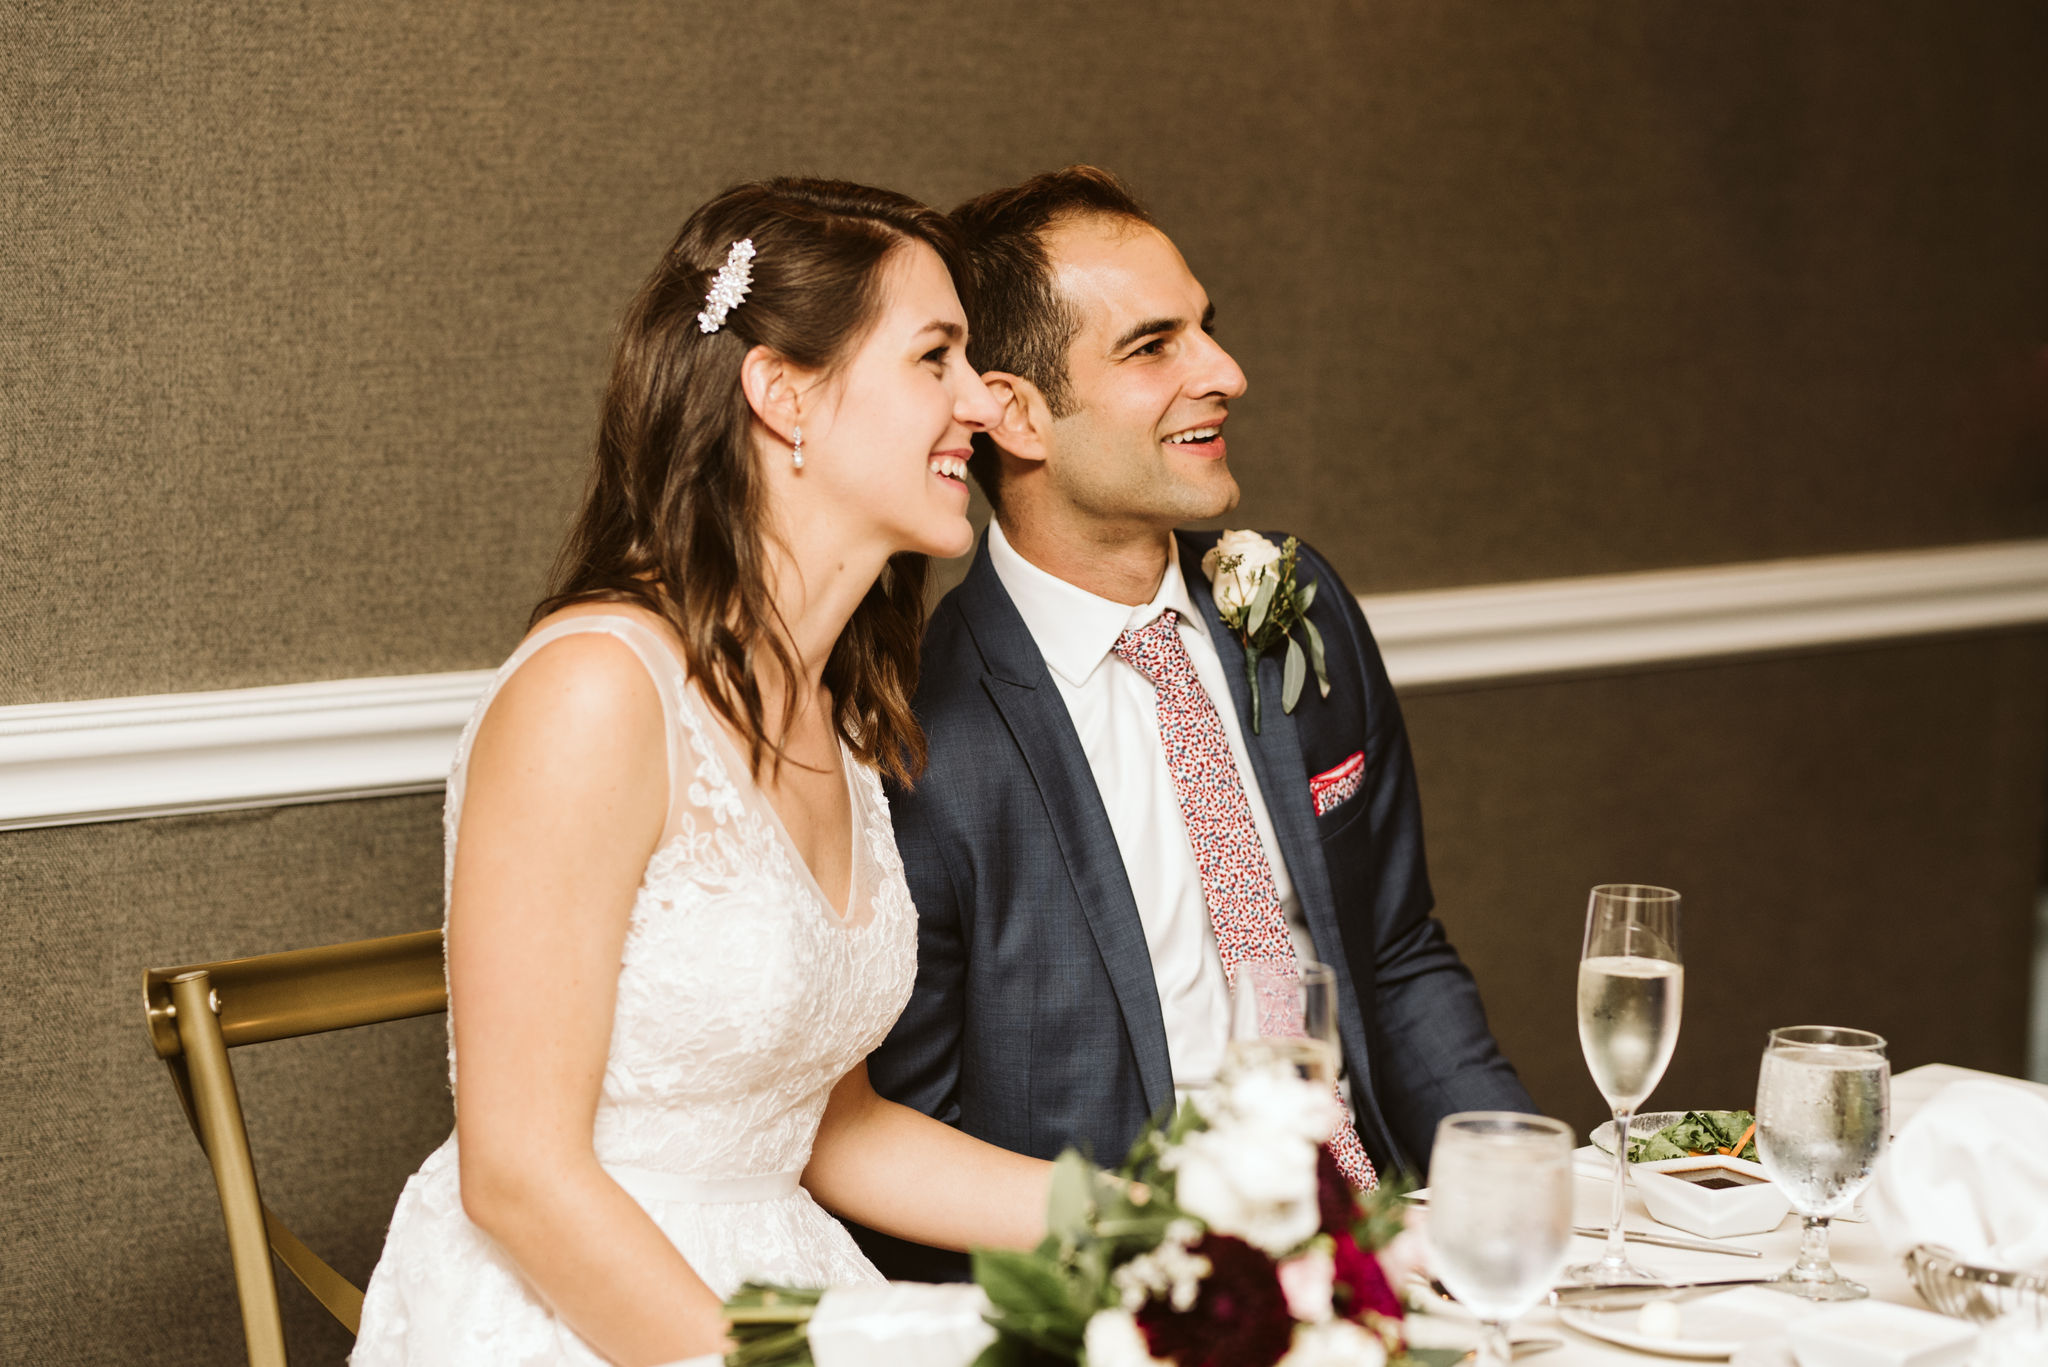  Phoenix Maryland, Baltimore Wedding Photographer, Eagle’s Nest Country Club, Classic, Romantic, Spring, Bride and Groom Smiling Together at Head Table, Gaby Vinas Hair 